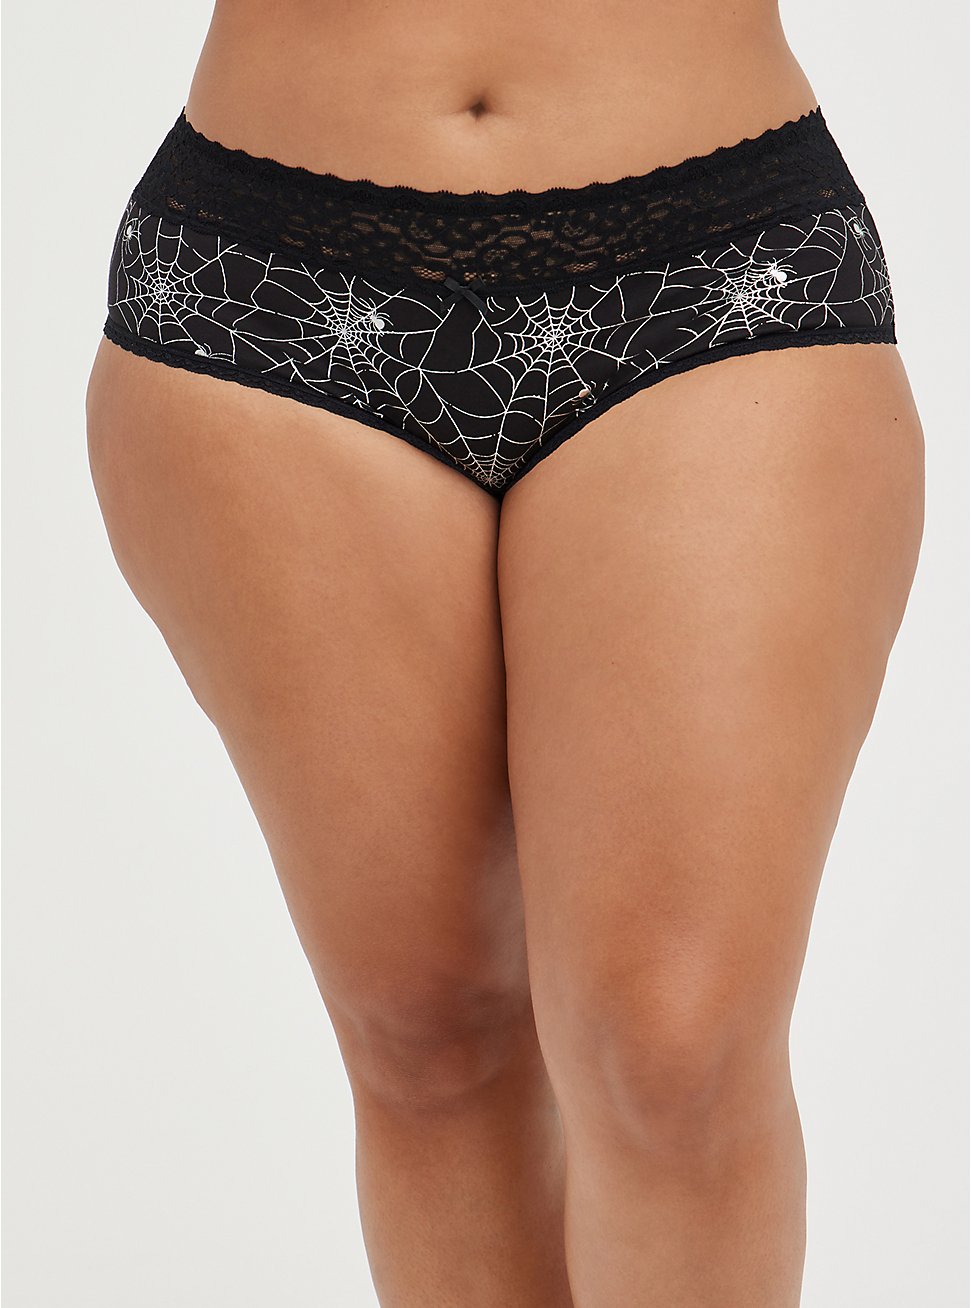 Wide Lace Trim Cheeky Panty - Cotton Webs Black And Silver, RAINBOW WEBS, hi-res